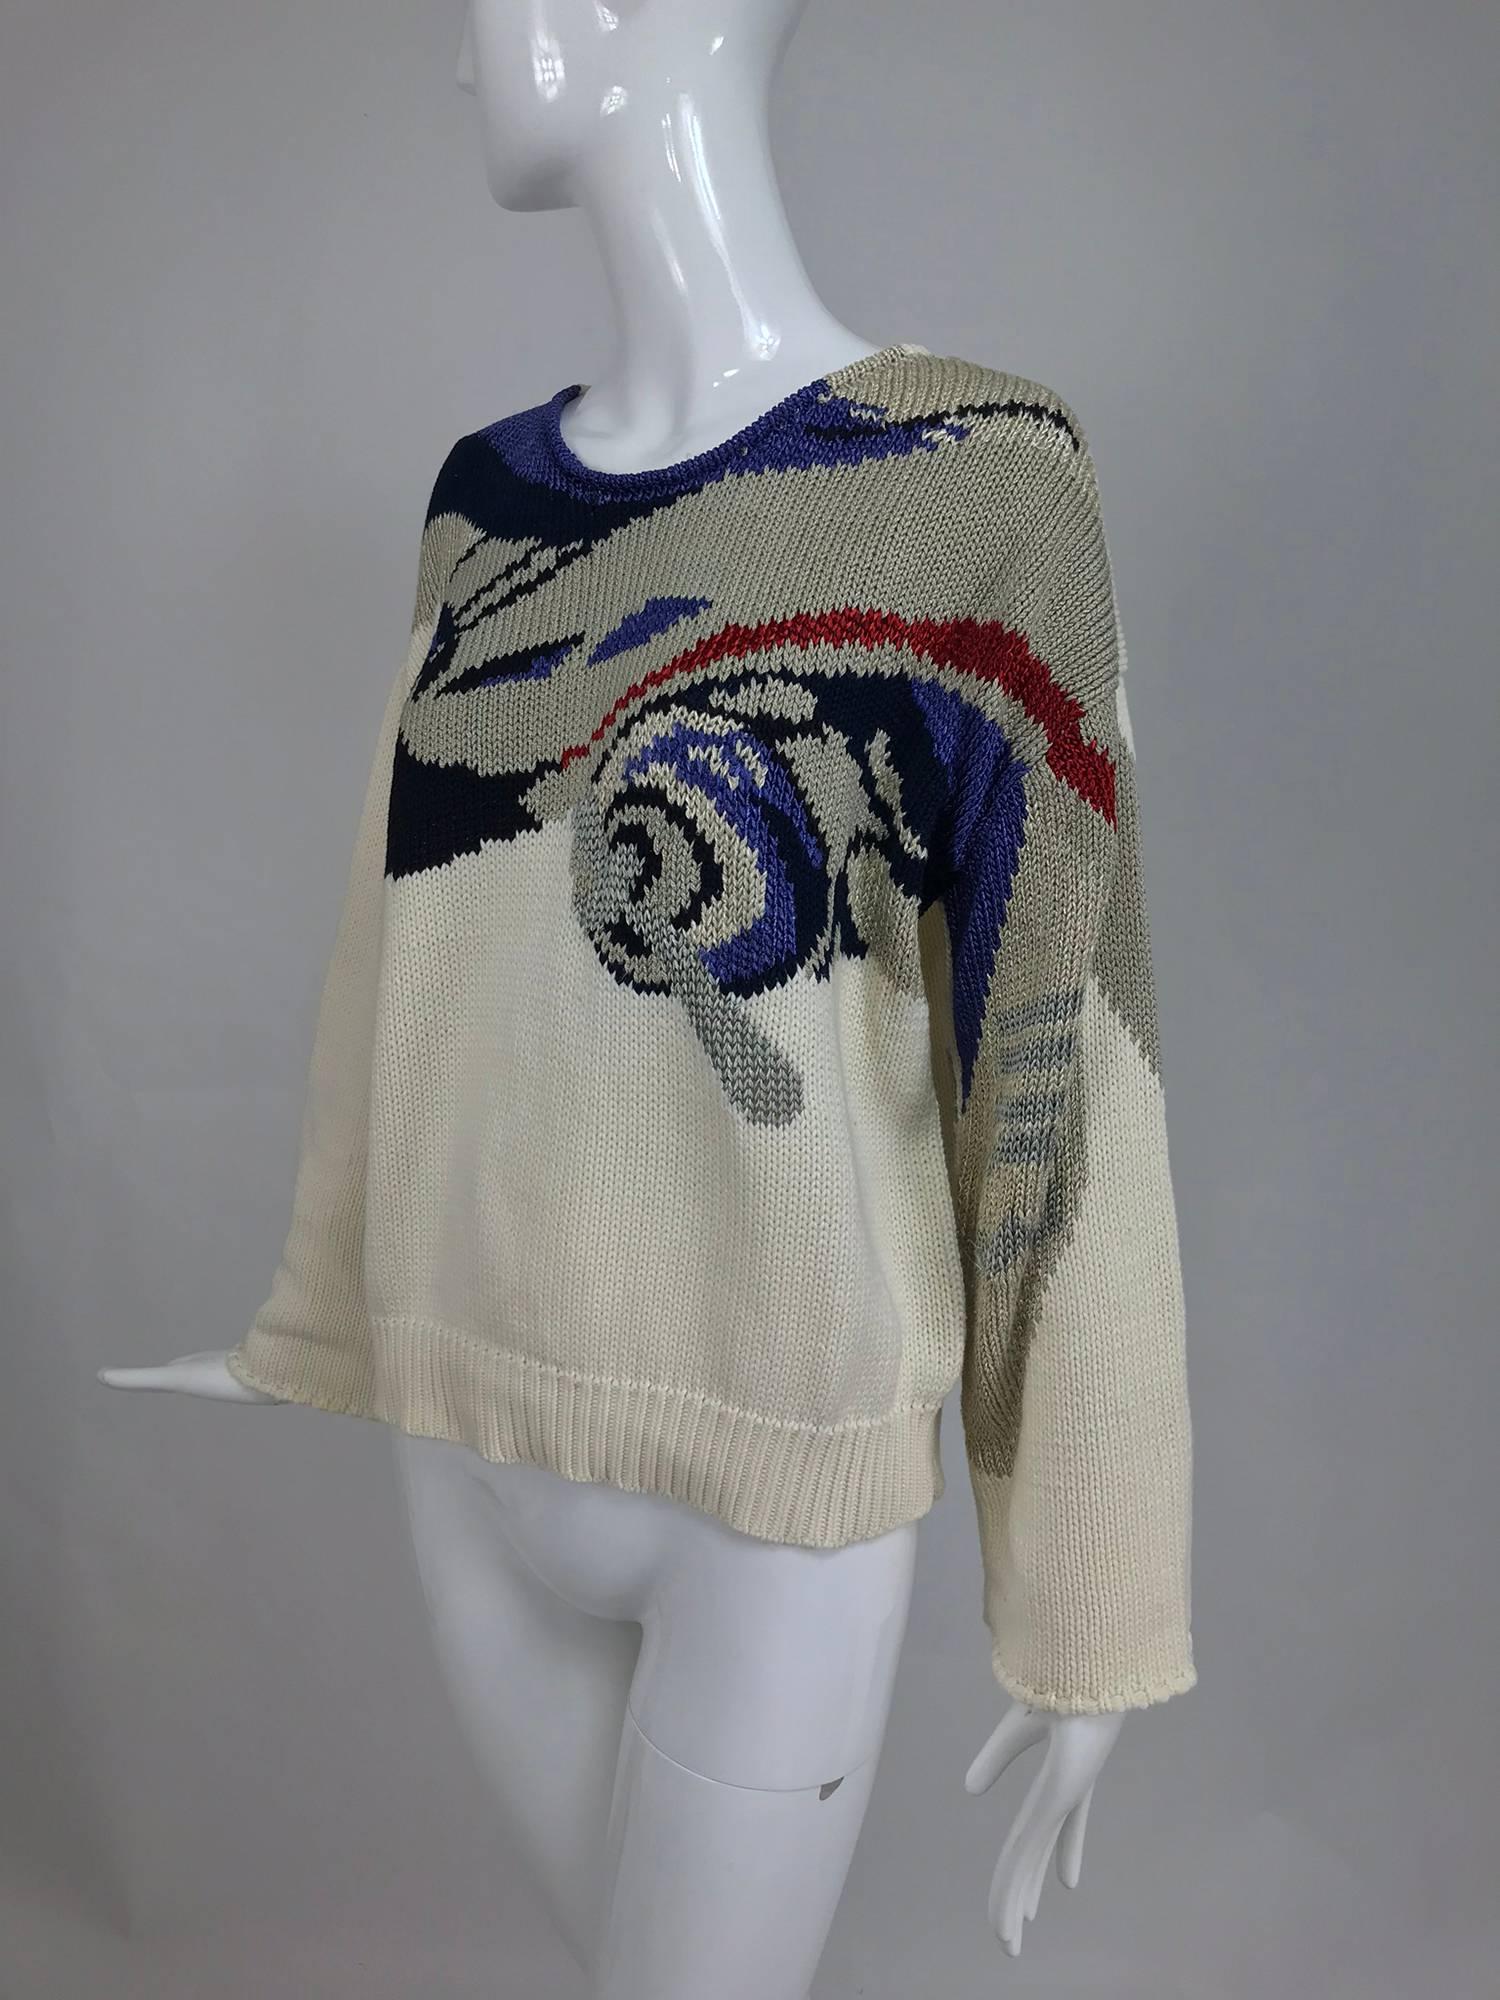 Krizia vintage airplane cotton and rayon knit pullover sweater...Round neck sweater features a large airplane on the shoulder and at the front, cream ground with the plane in blues, black silver and red...Long sleeves straight sleeves with overcast